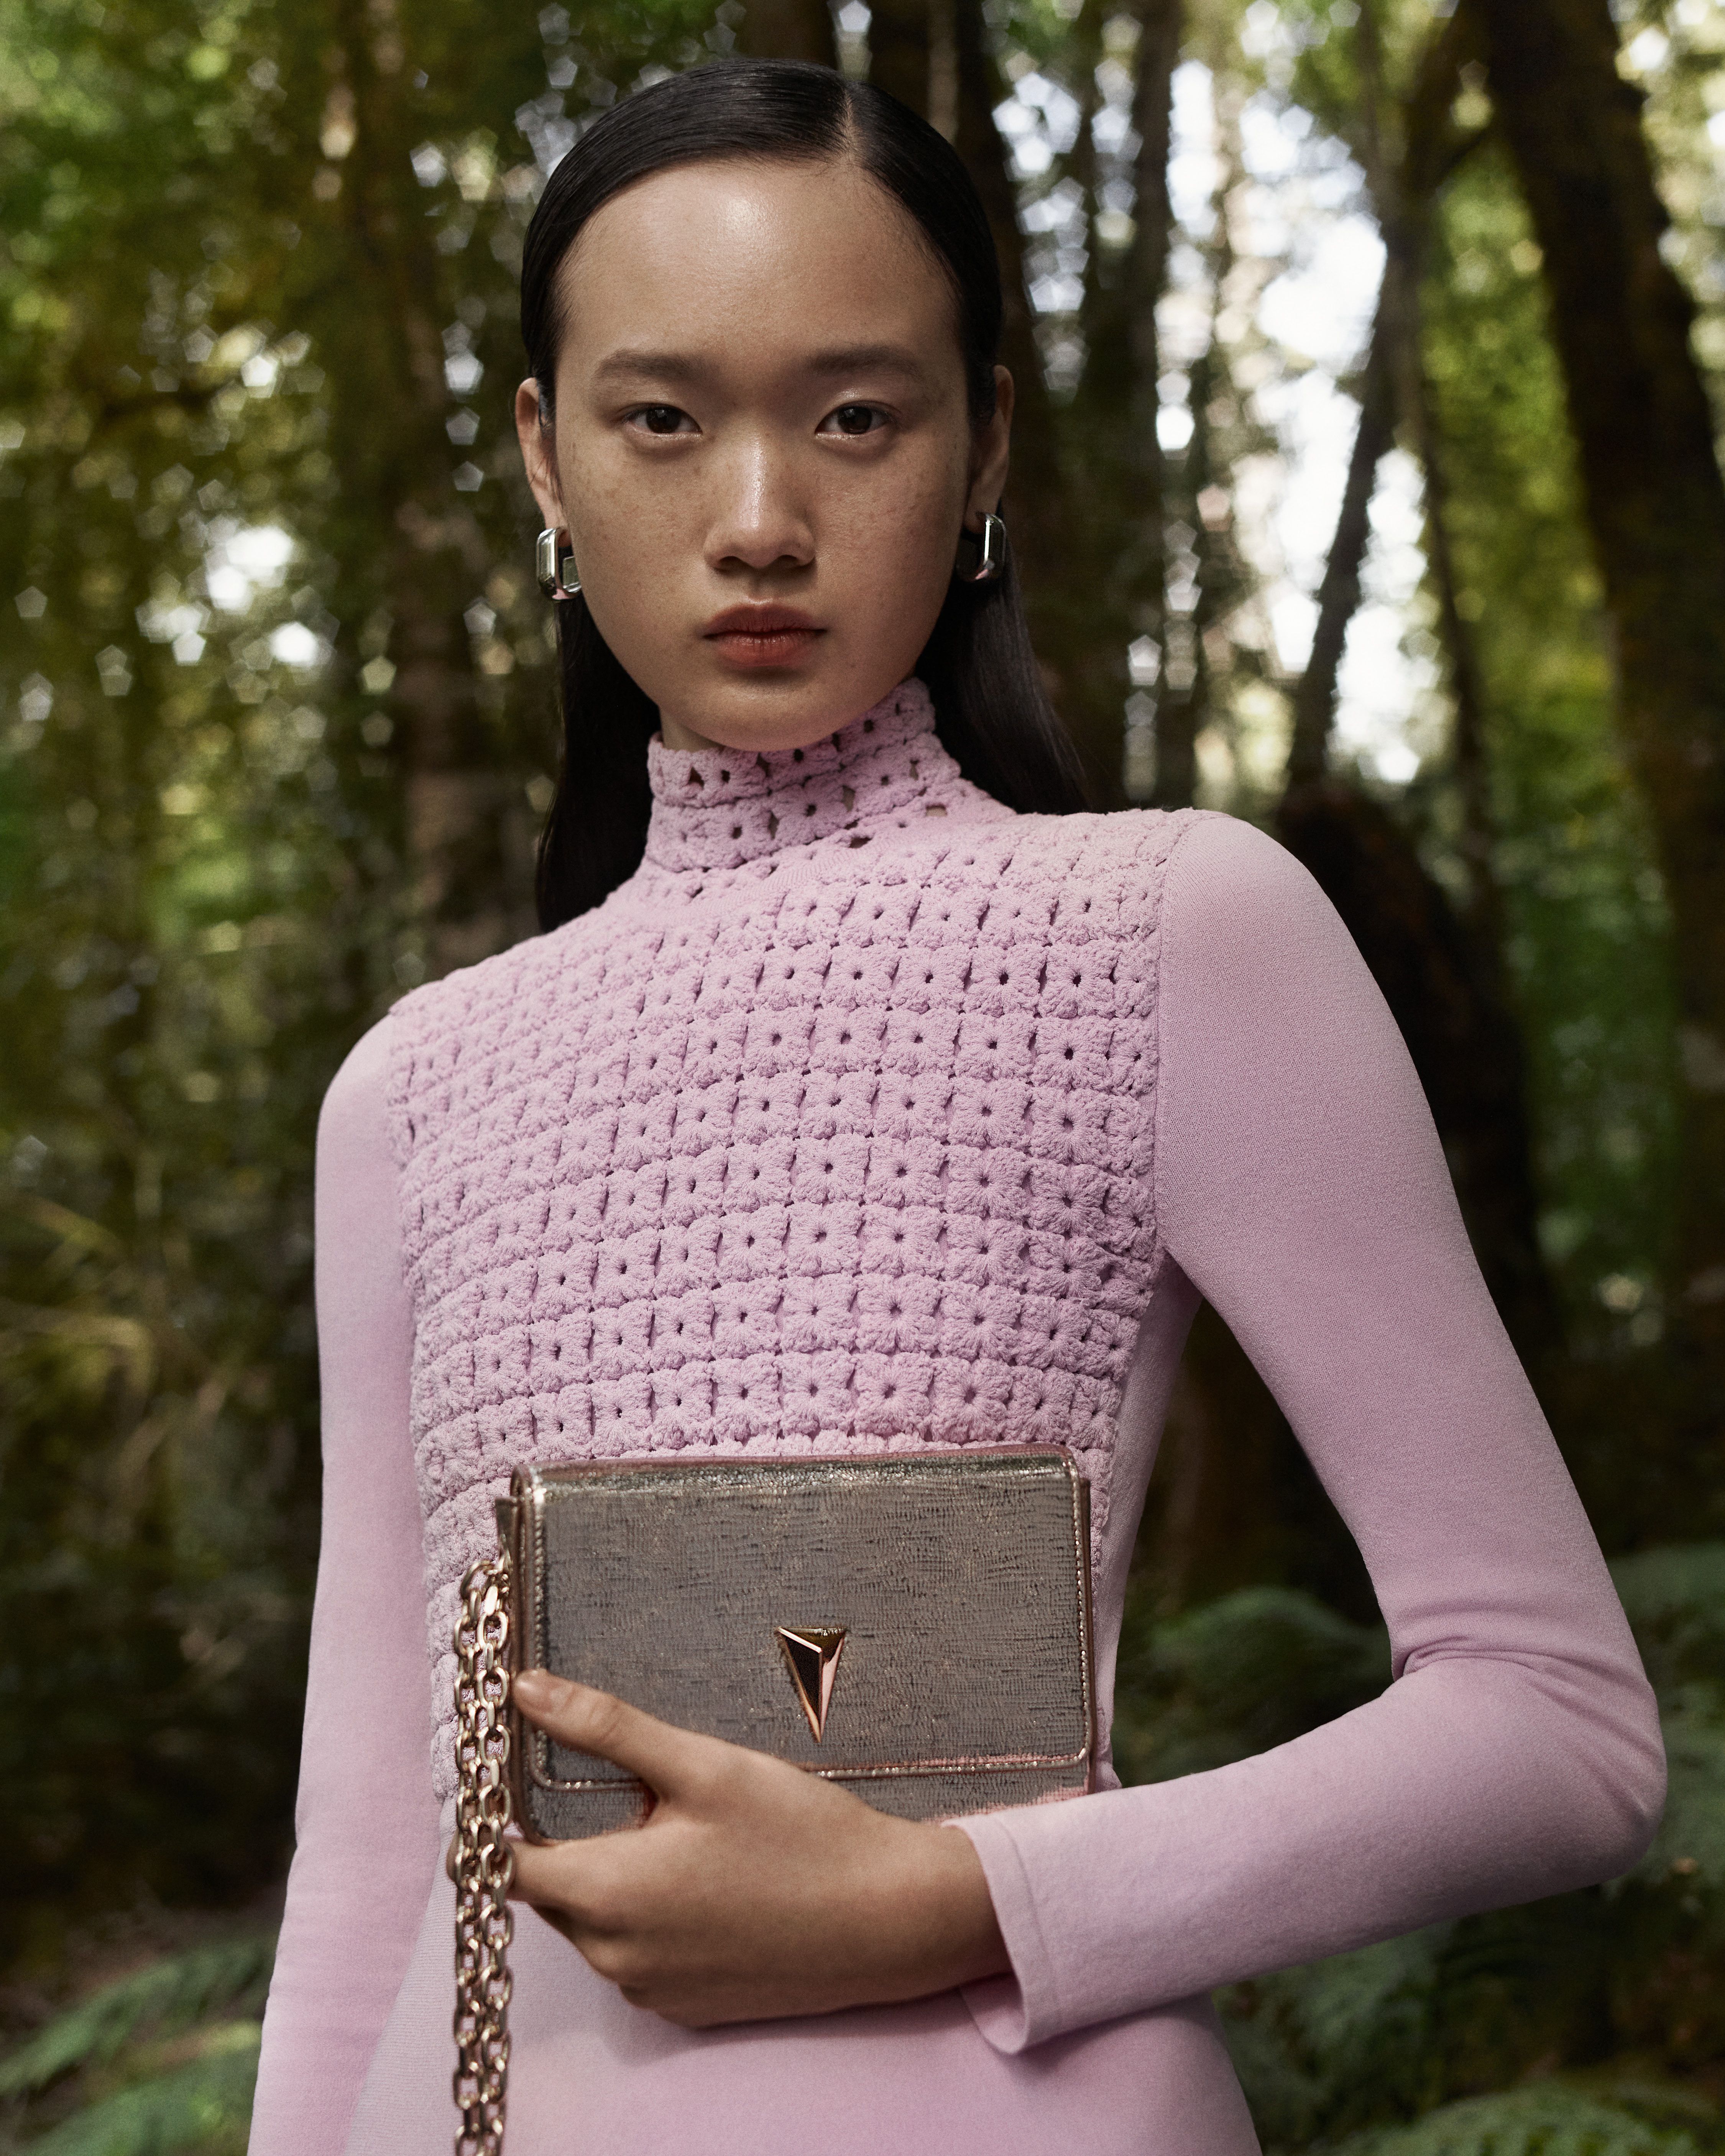 Venus He wearing a pink Crepe Knit long-sleeved dress carrying a gold bag in the forest